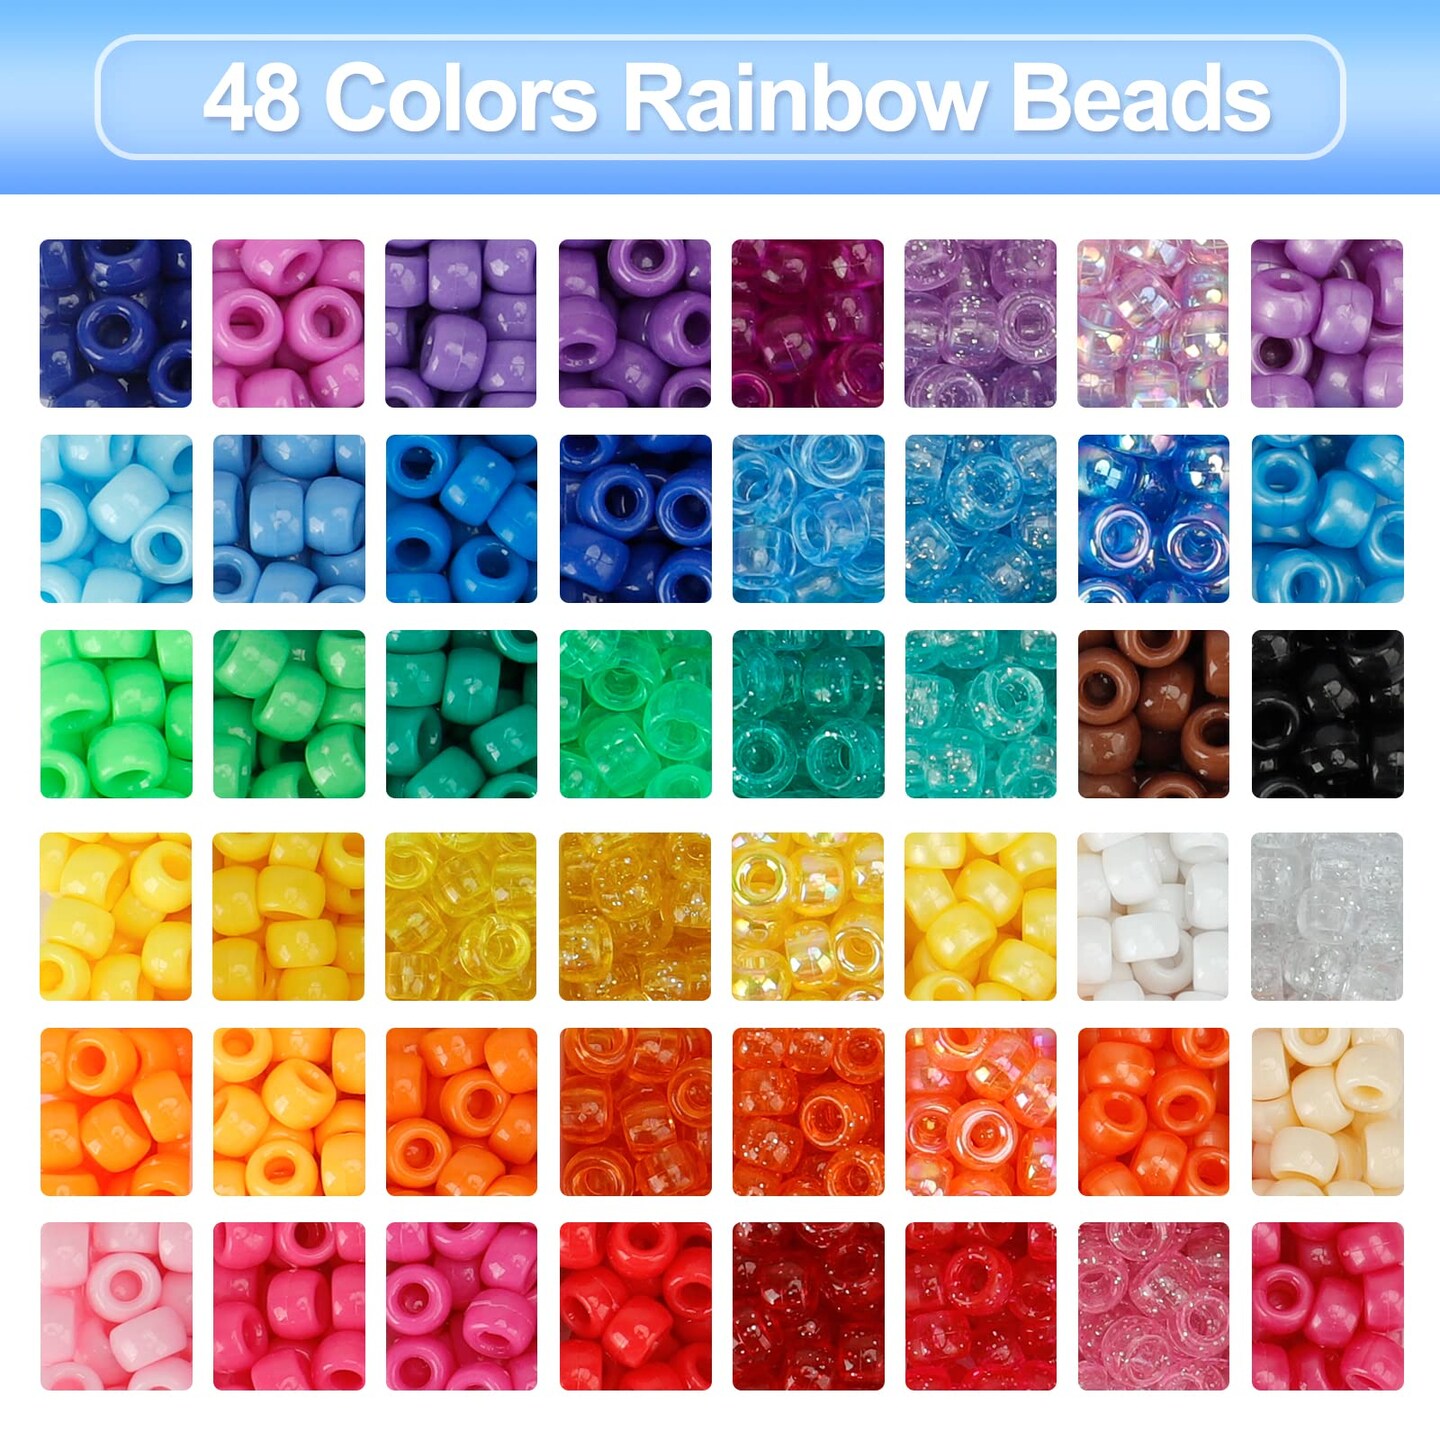 1100pcs Pony Beads,Friendship Bracelet Beads Kit,Beads for Jewelry  Making,Hair Beads,Beads for Bracelets Making,Beads for Crafts Pony Beads  Bulk Kandi